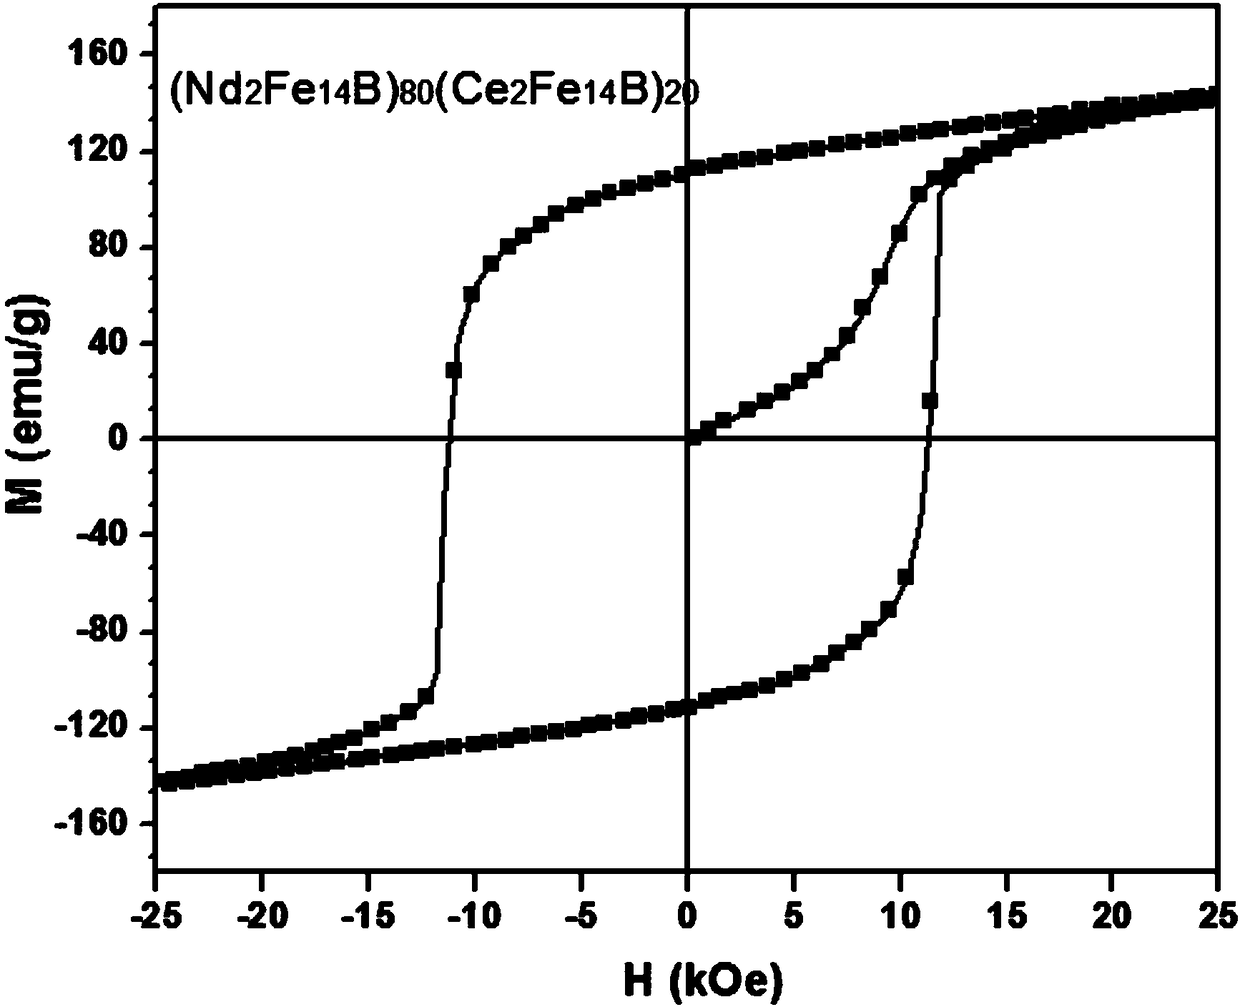 A dual main phase nd2fe14b-ce2fe14b composite permanent magnet and preparation method thereof